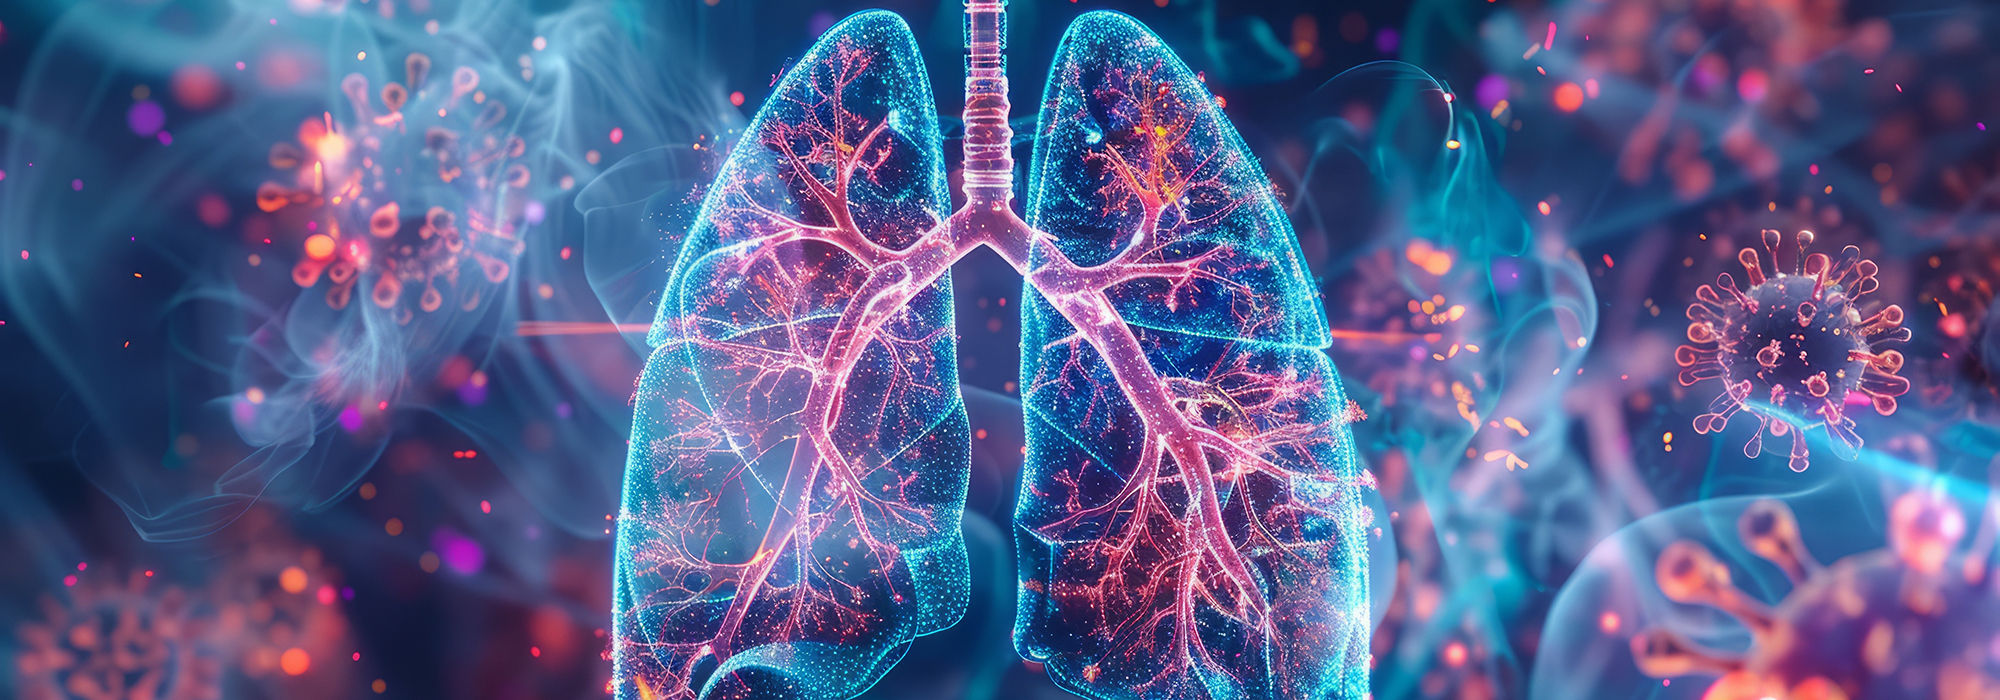 Digital illustration of human lungs with trachea surrounded by virus particles